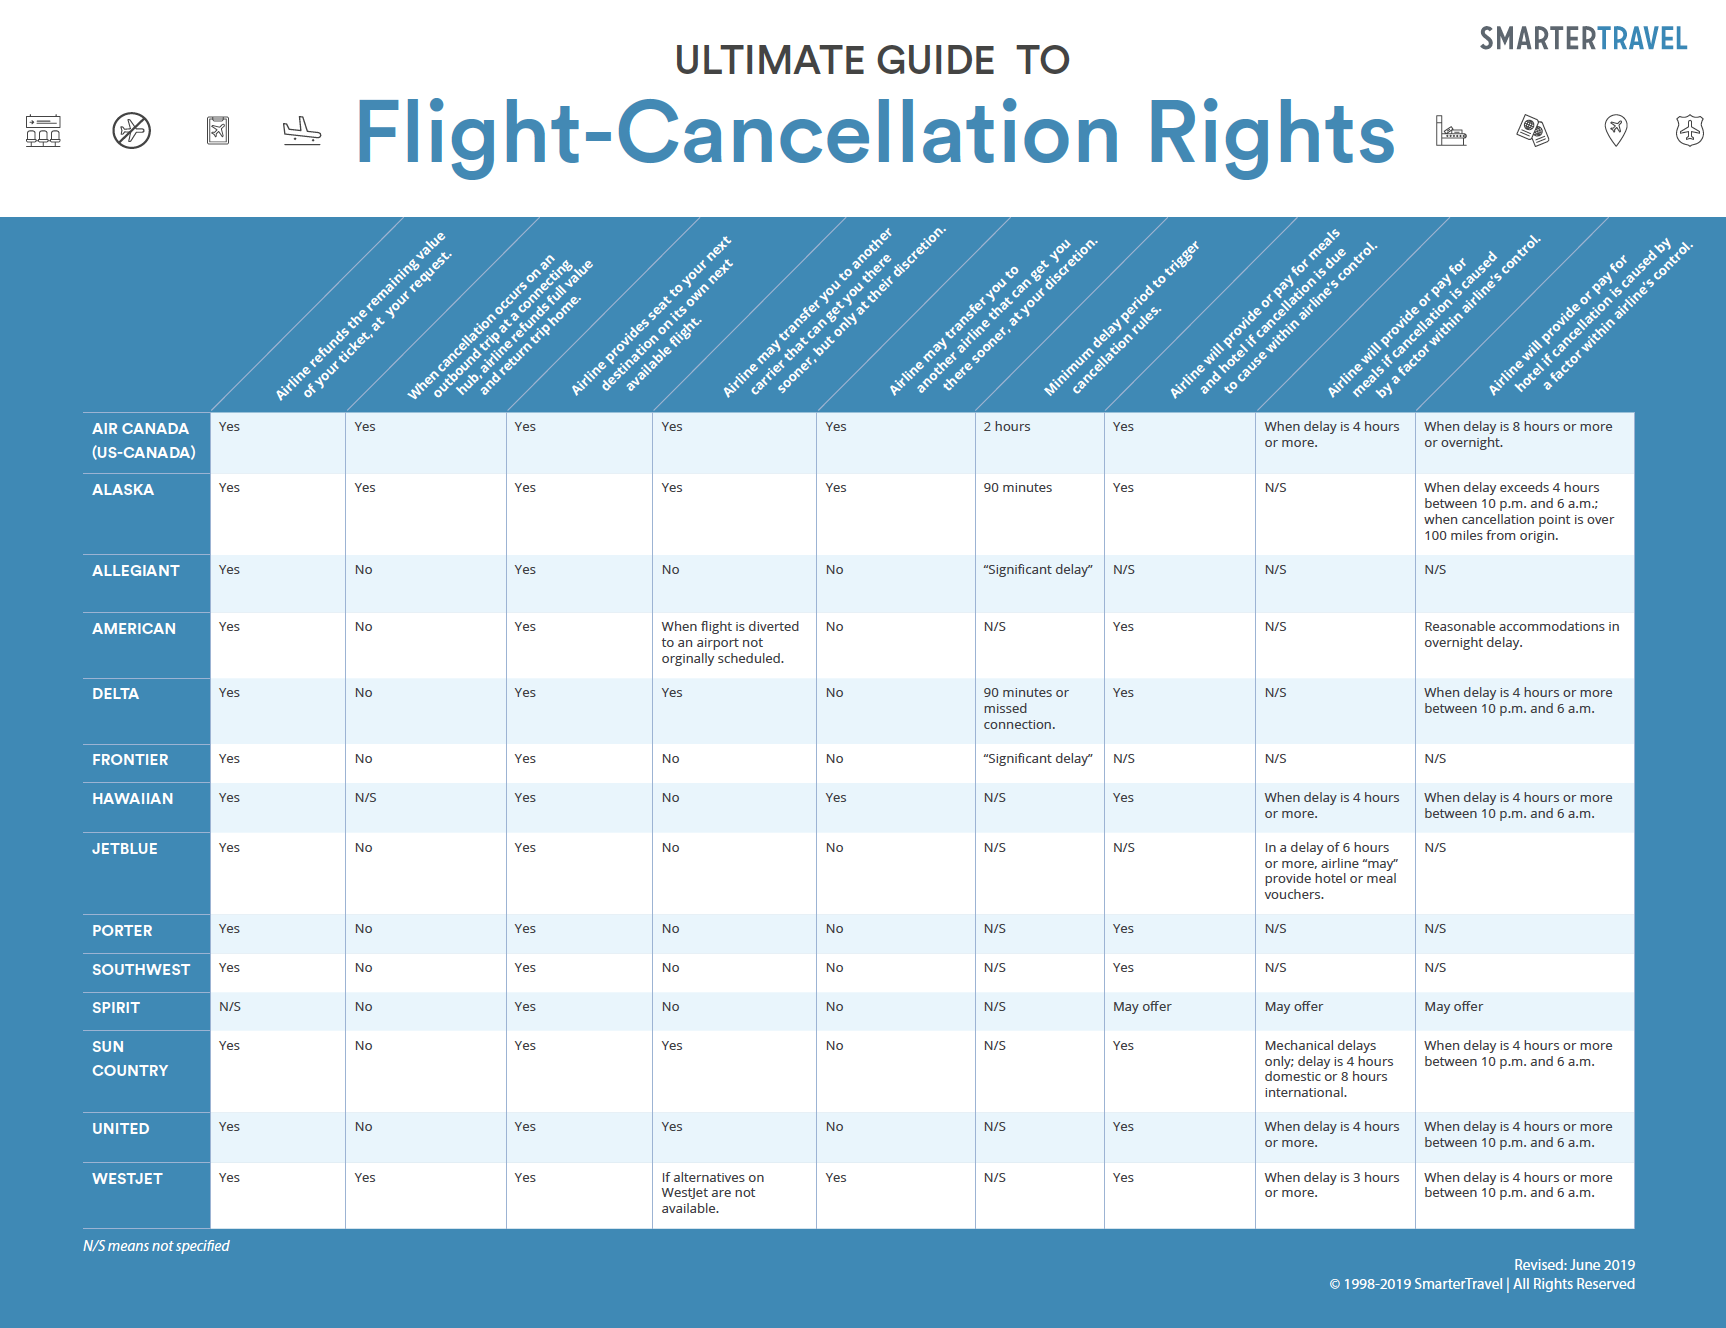 FlightCancellation Rights The Ultimate Guide